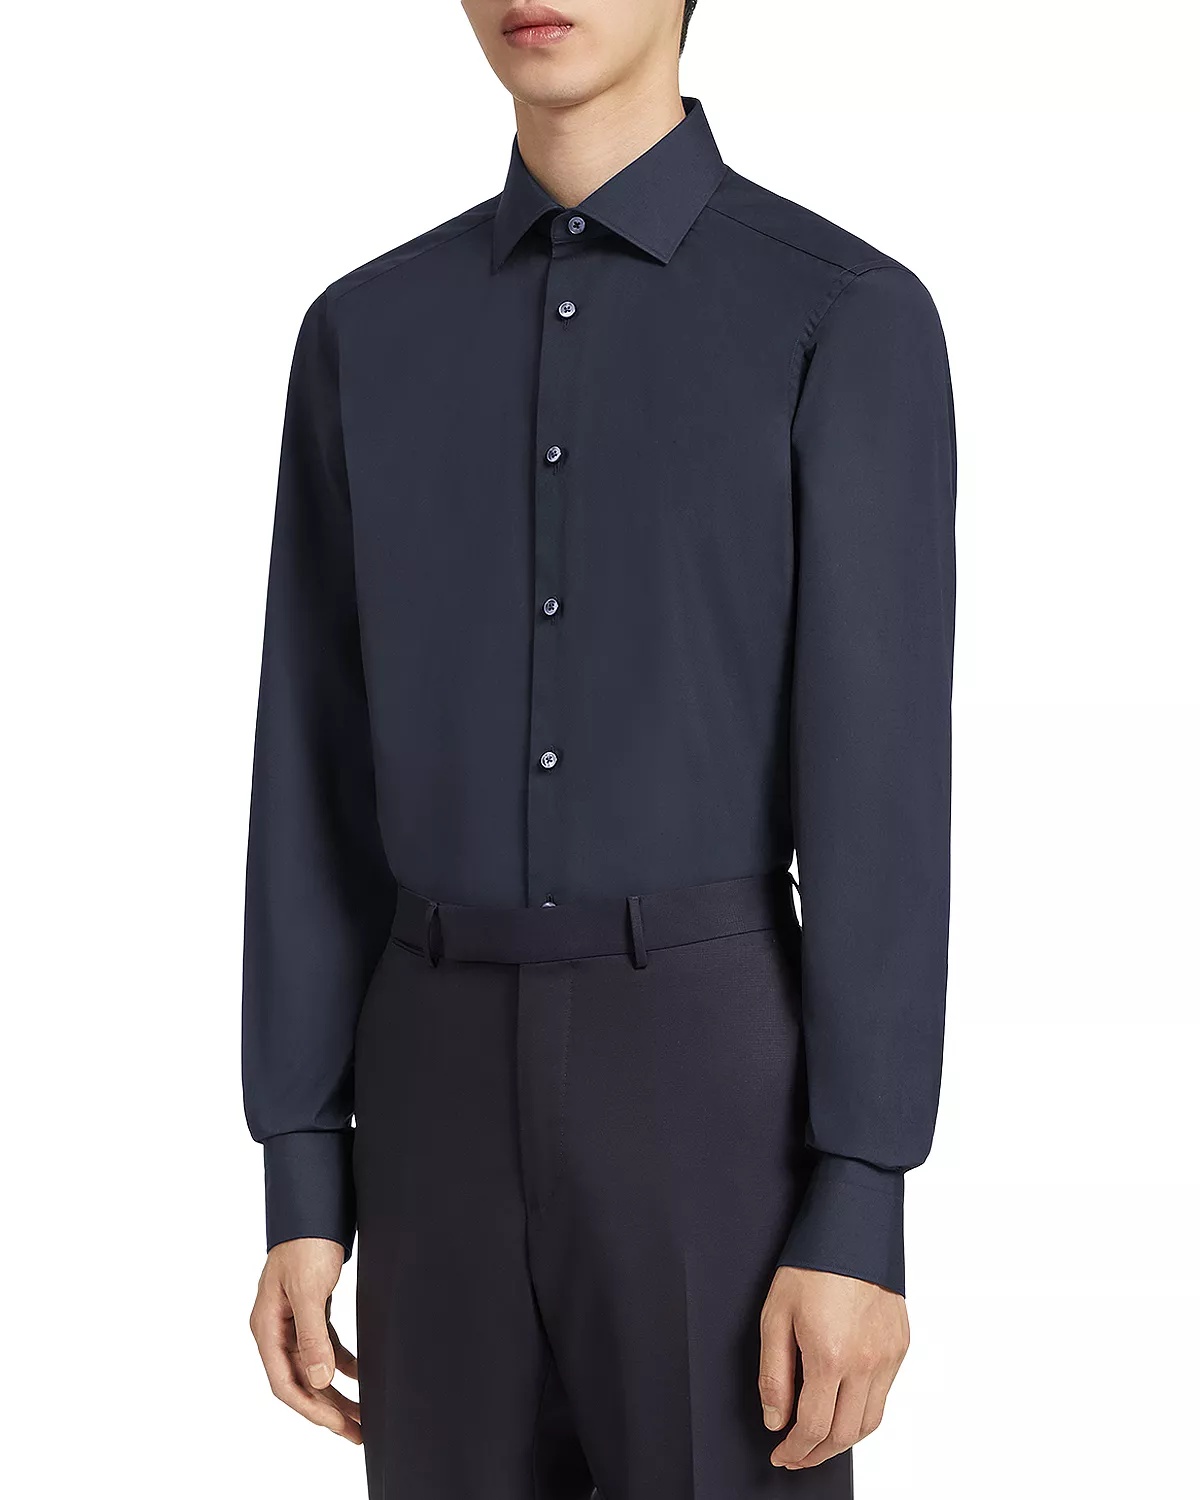 Navy Blue Trofeo™ Long Sleeve Tailored Fit Shirt - 1